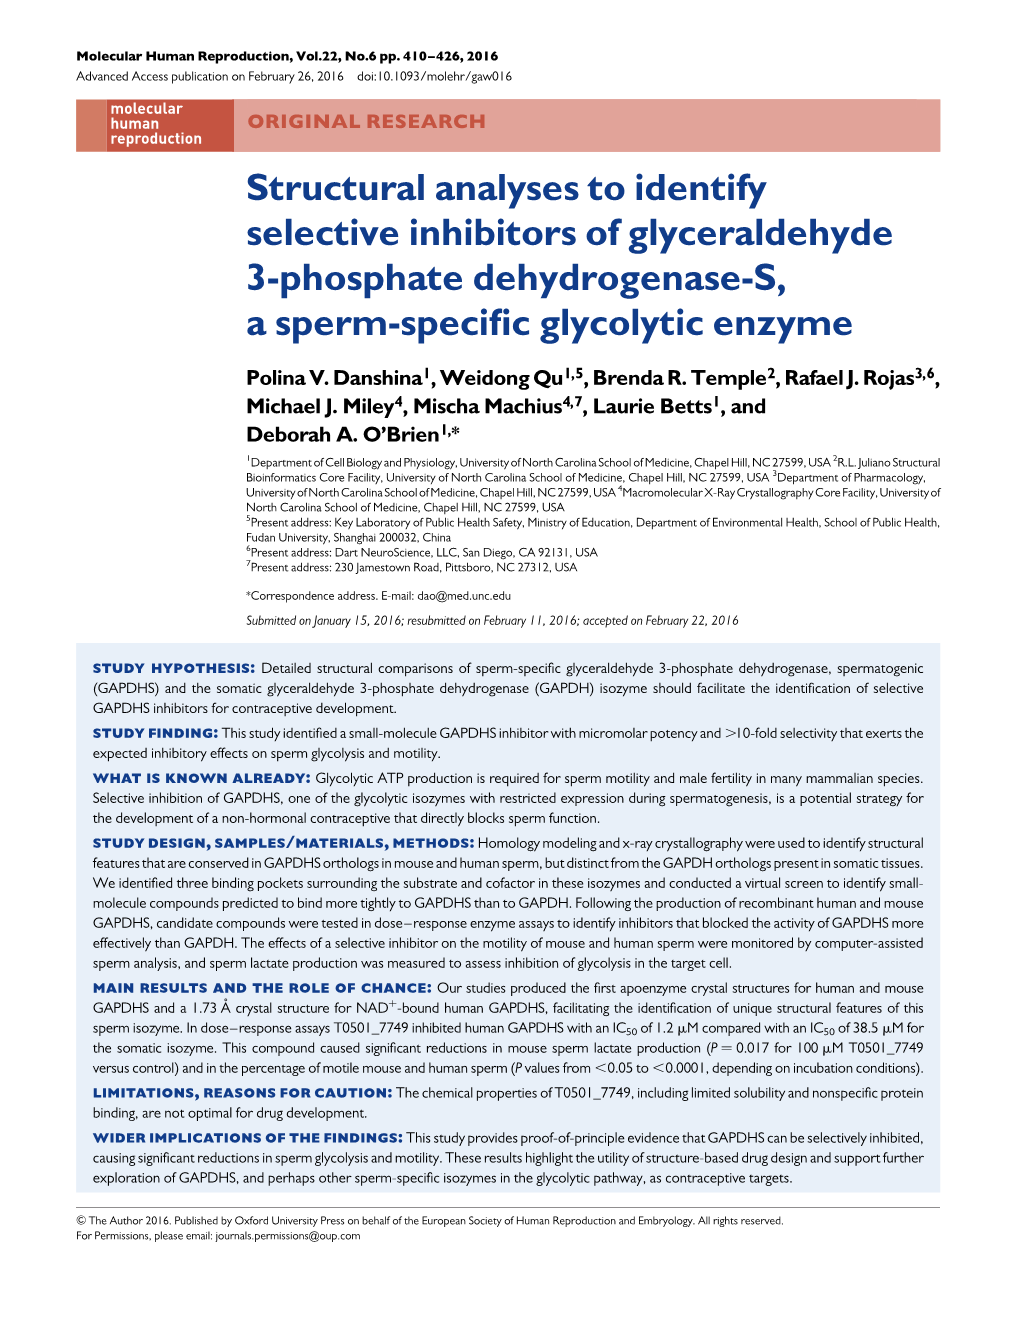 Structural Analyses to Identify Selective Inhibitors of Glyceraldehyde 3-Phosphate Dehydrogenase-S, a Sperm-Specific Glycolytic